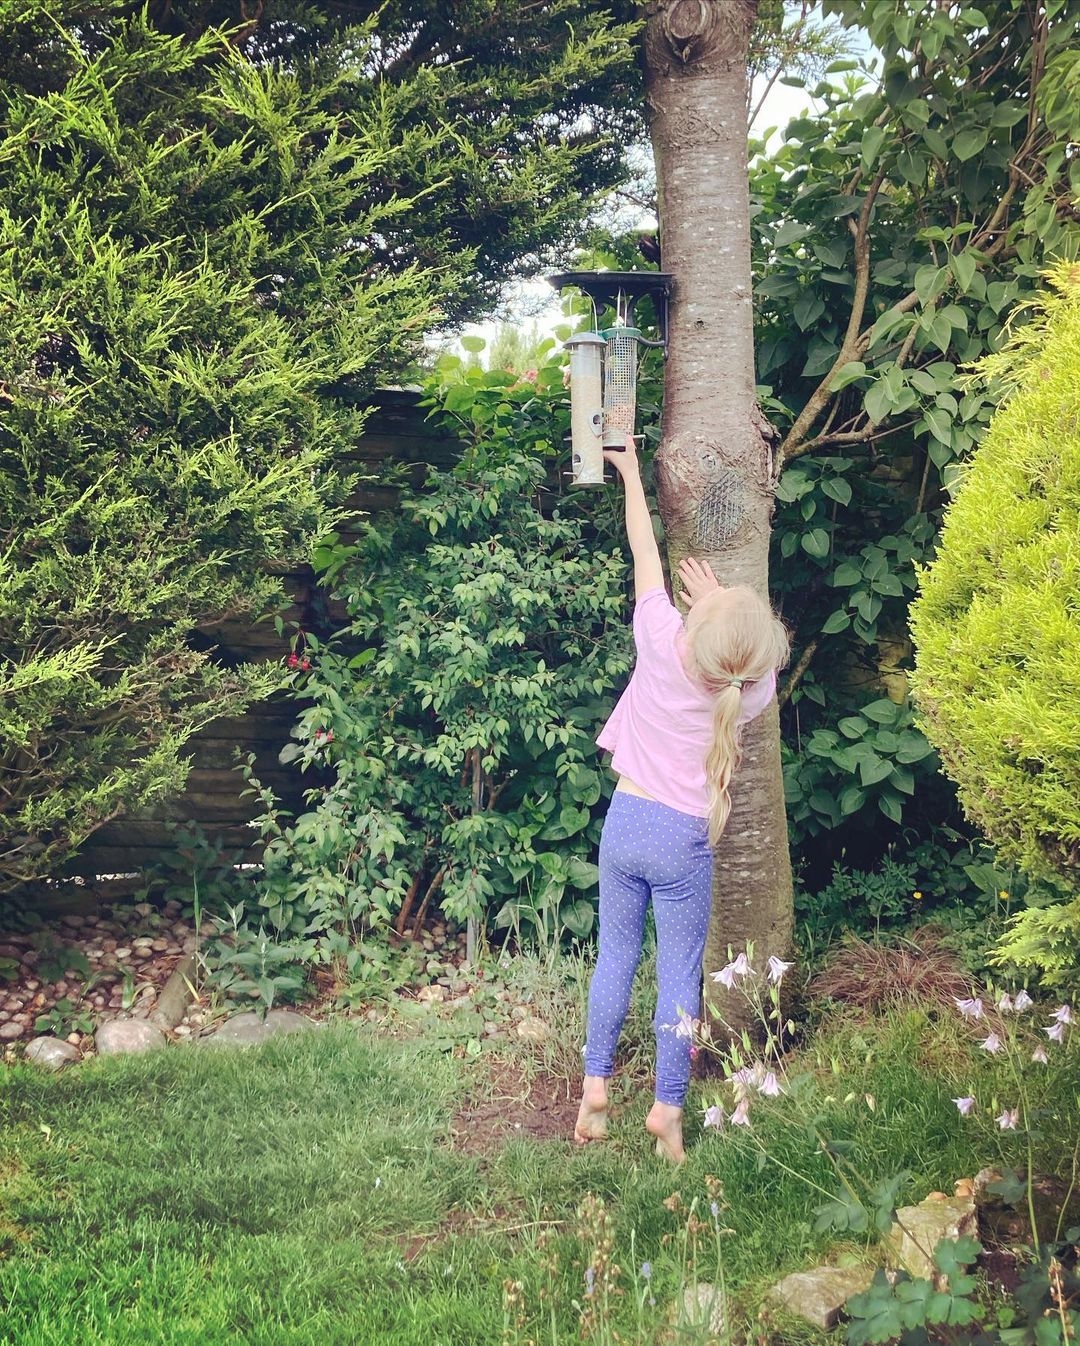 Child reaching for outdoor bird feeder. Photo by Instagram user @thebarenecessitoys